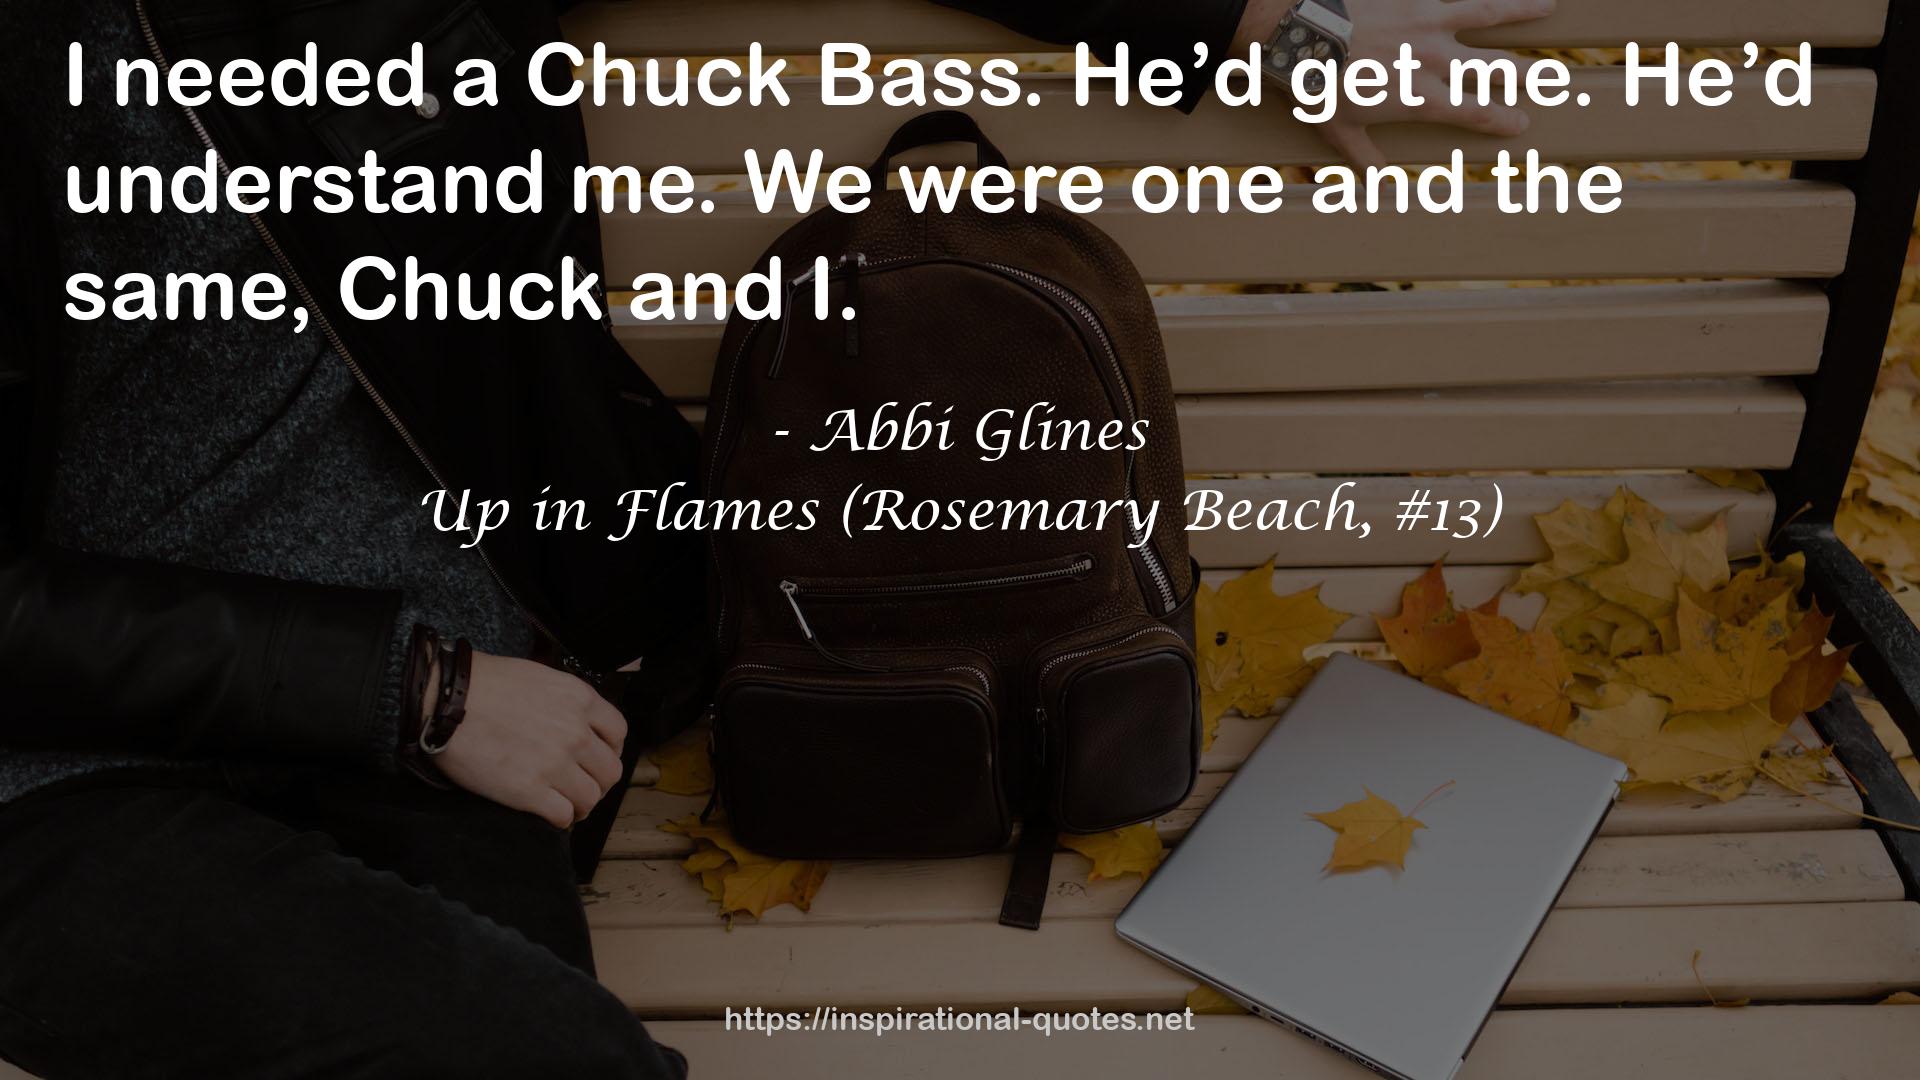 Up in Flames (Rosemary Beach, #13) QUOTES